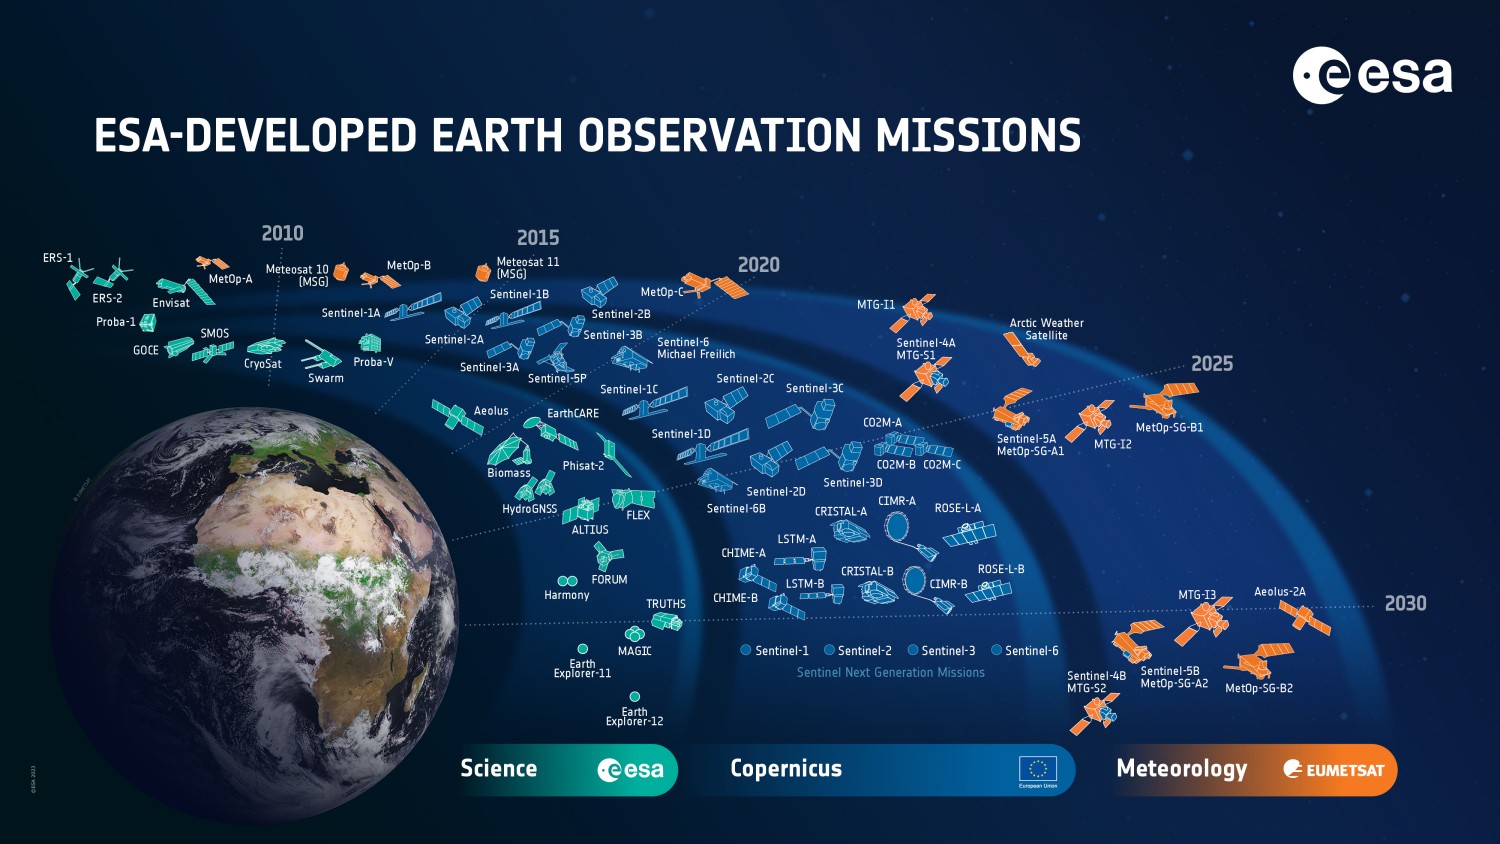 Figure 1.5: Earth observation missions developed by the European Space Agency